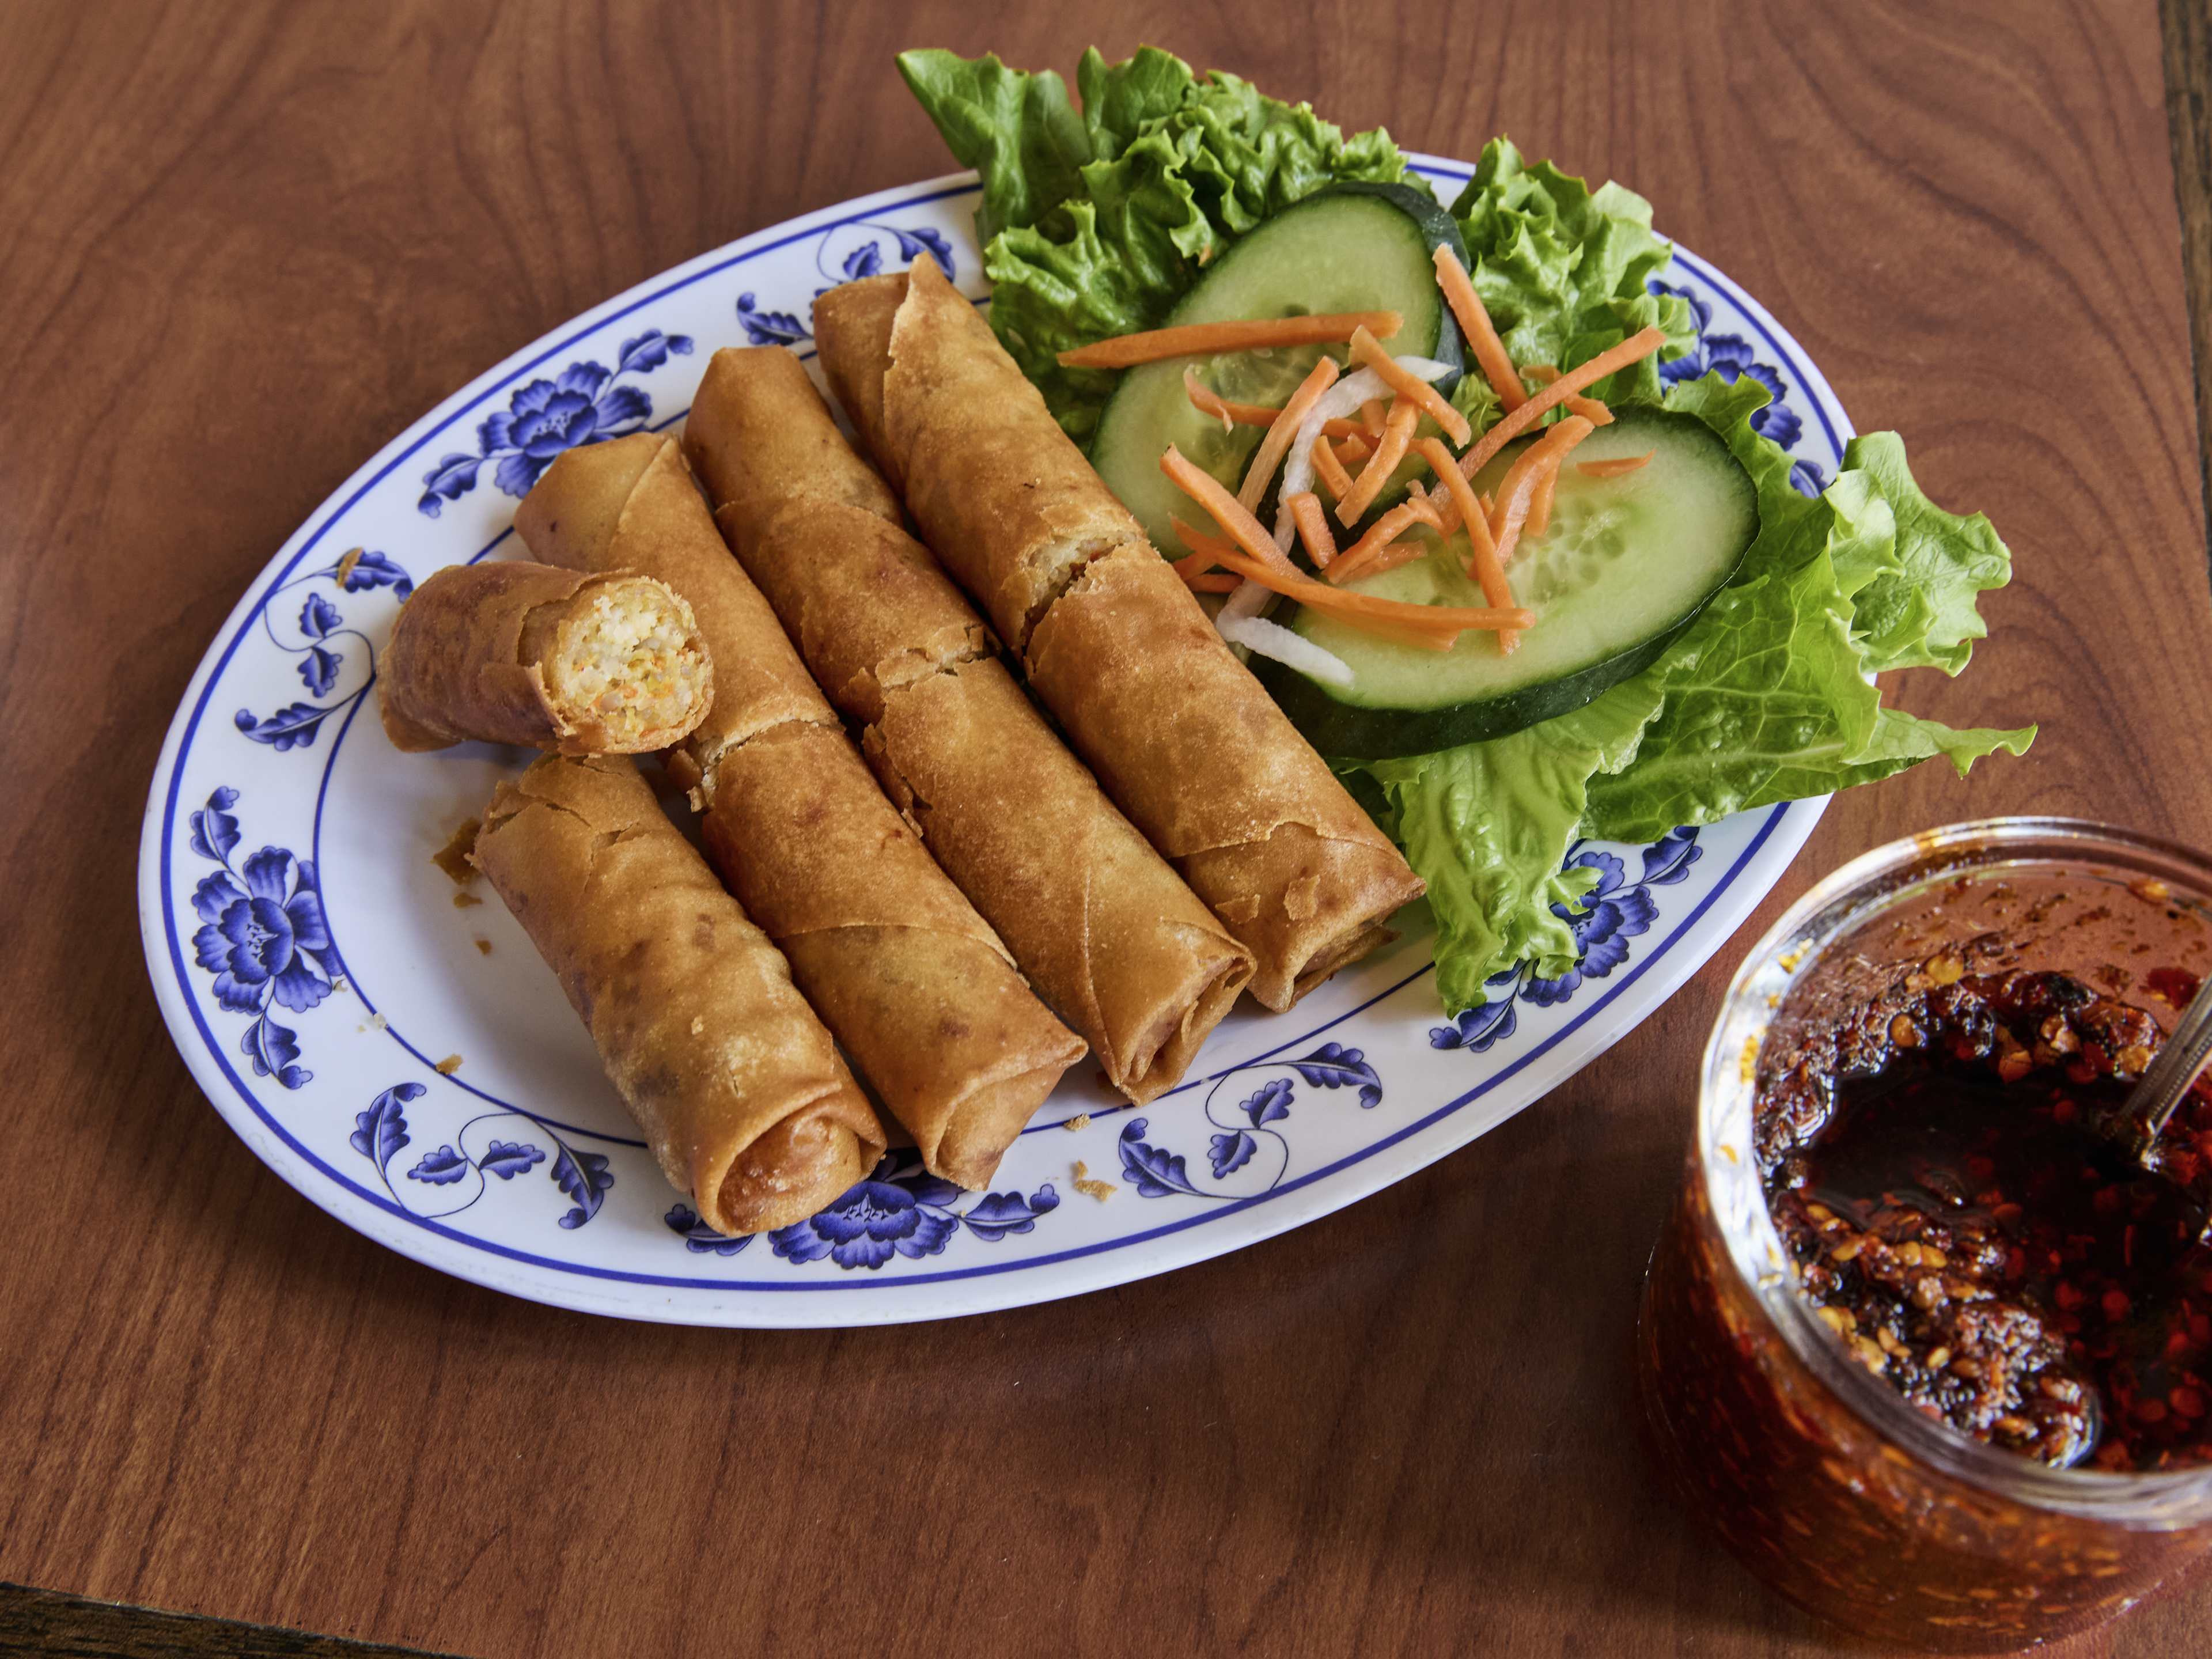 crispy fried eggrolls served next to small salad of cucumbers and carrots